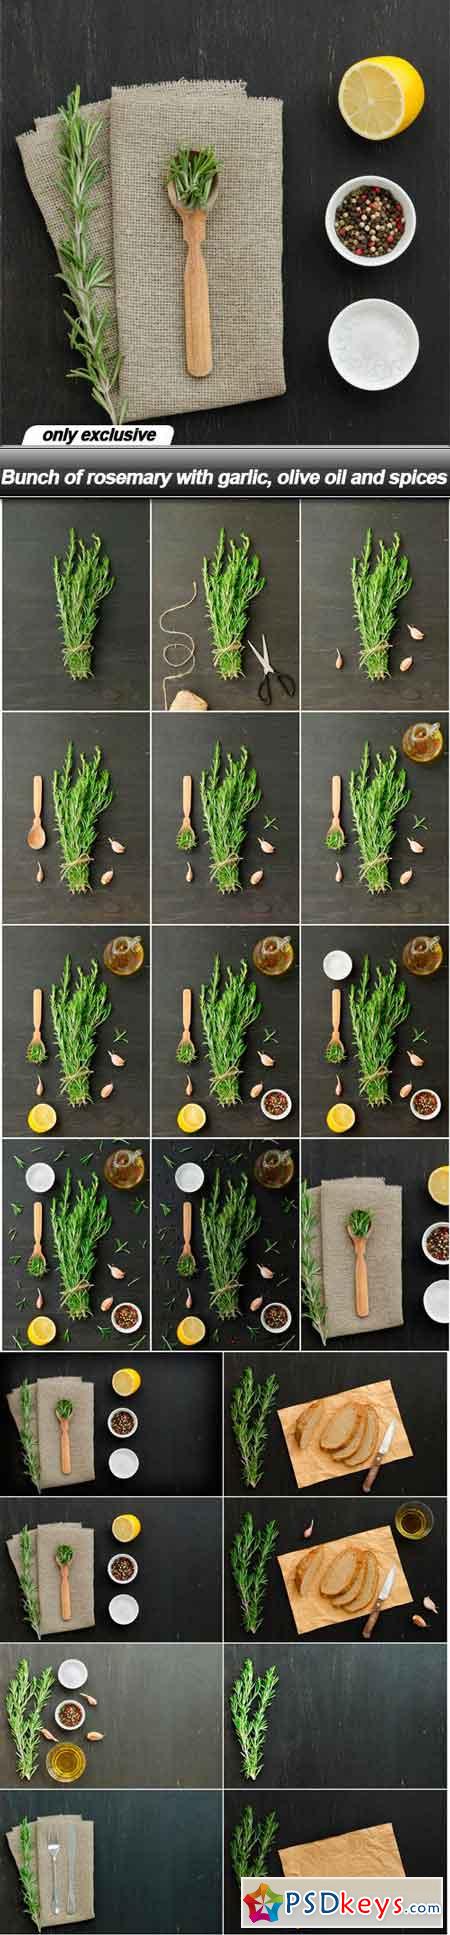 Bunch of rosemary with garlic, olive oil and spices - 20 UHQ JPEG